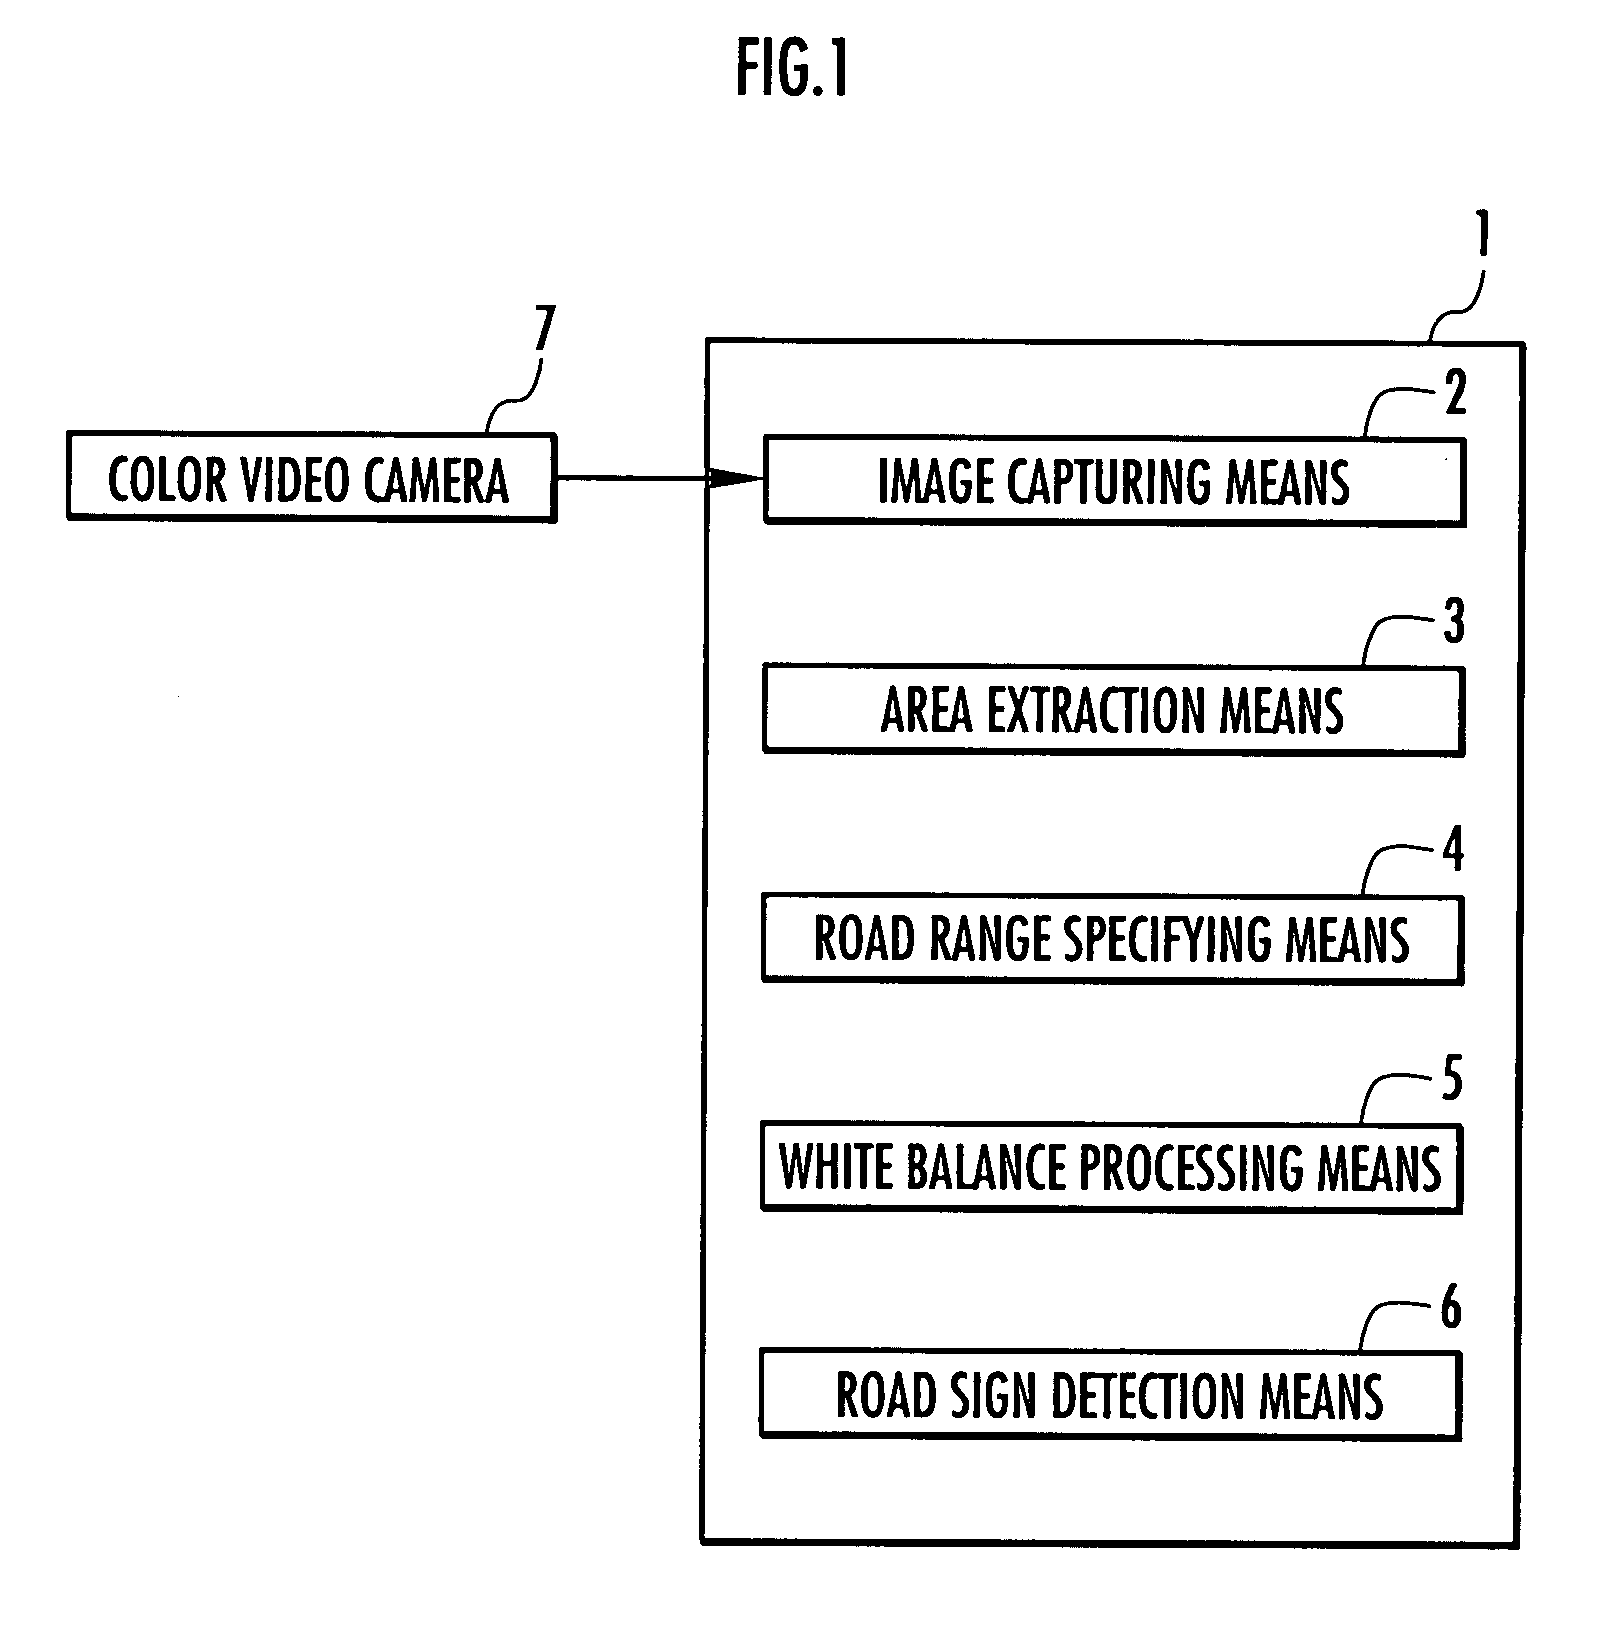 Vehicle and road sign recognition device